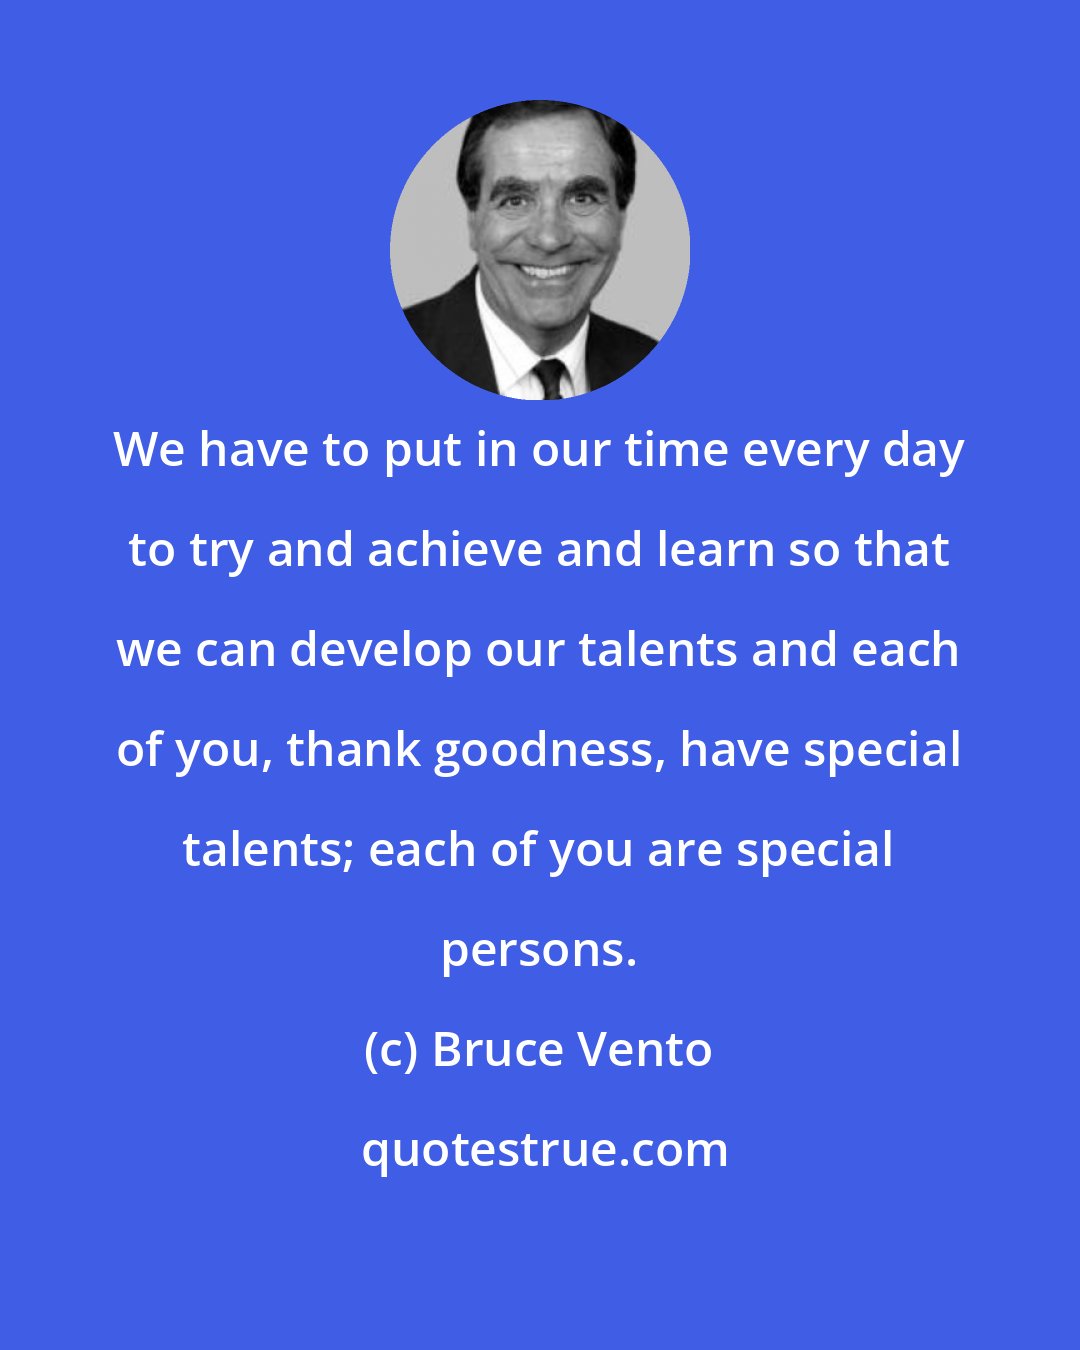 Bruce Vento: We have to put in our time every day to try and achieve and learn so that we can develop our talents and each of you, thank goodness, have special talents; each of you are special persons.